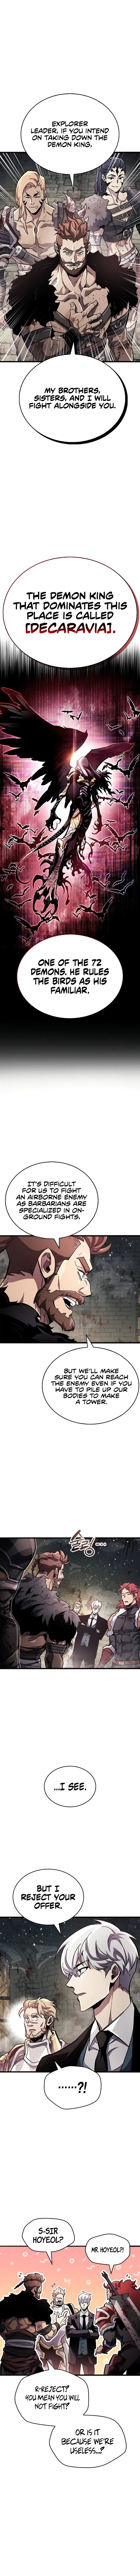 The Player Hides His Past Chapter 46 page 9